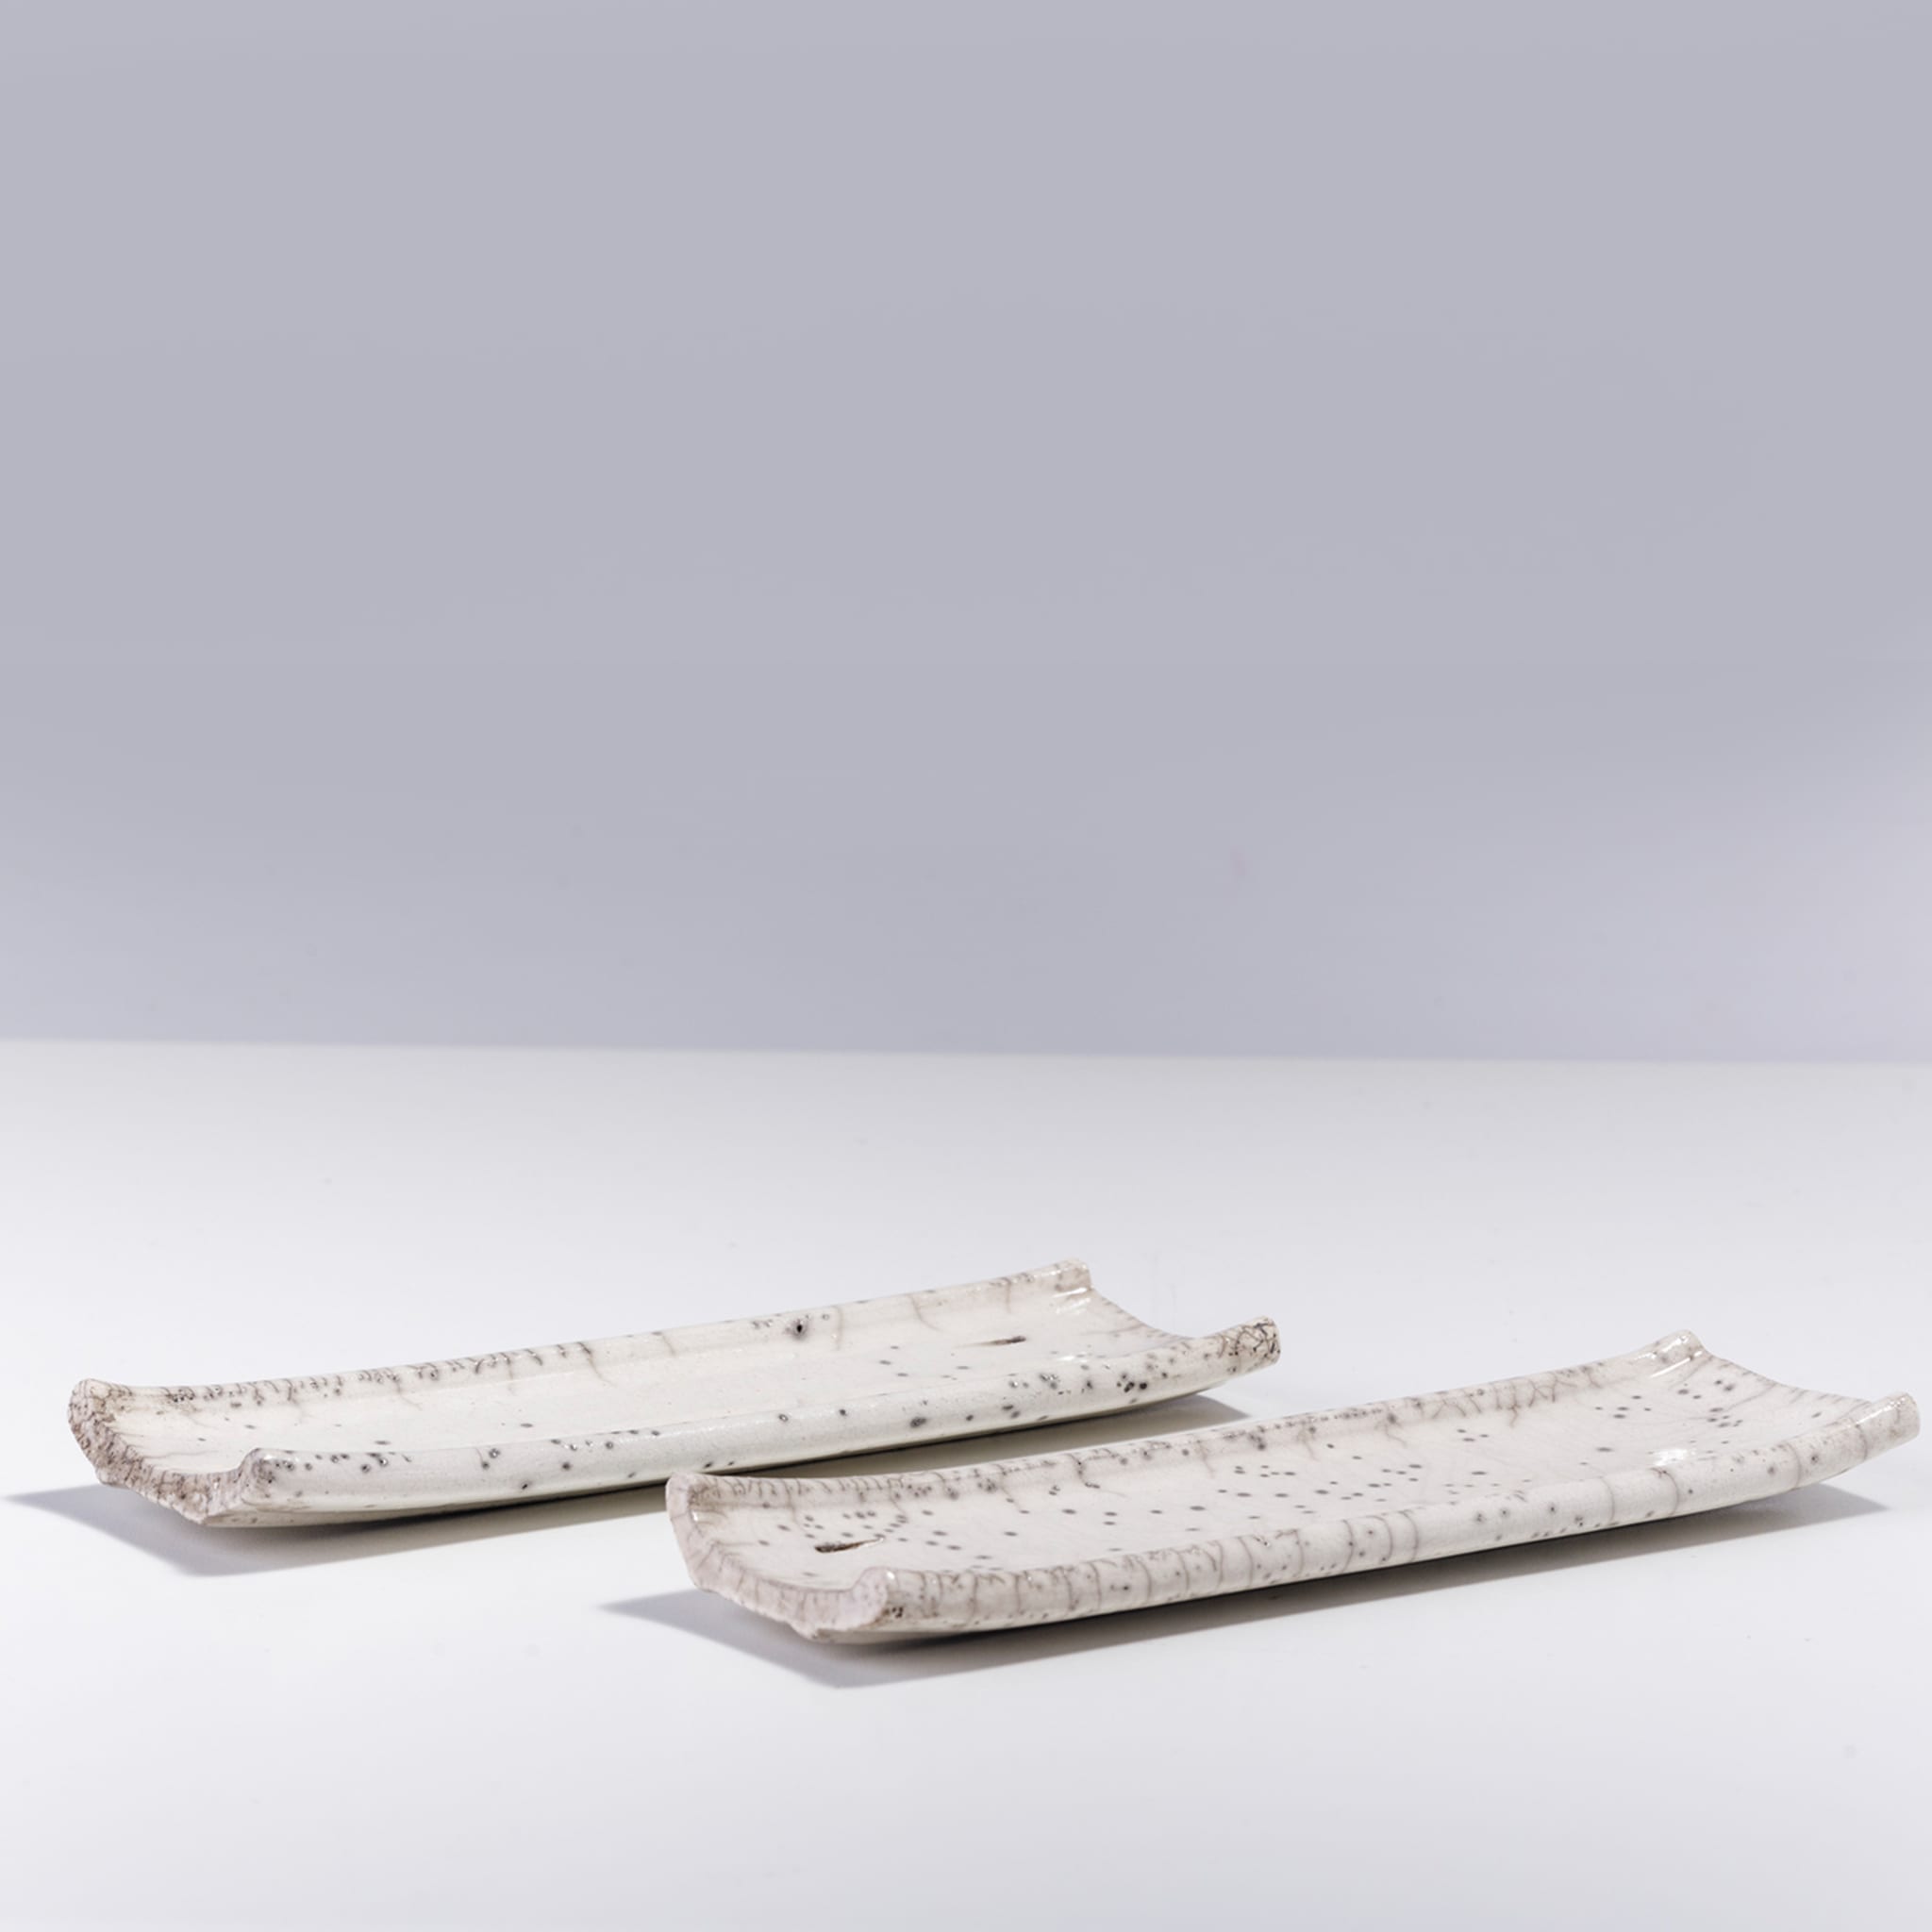 Incenso Set of 2 Incense Holders - Alternative view 2